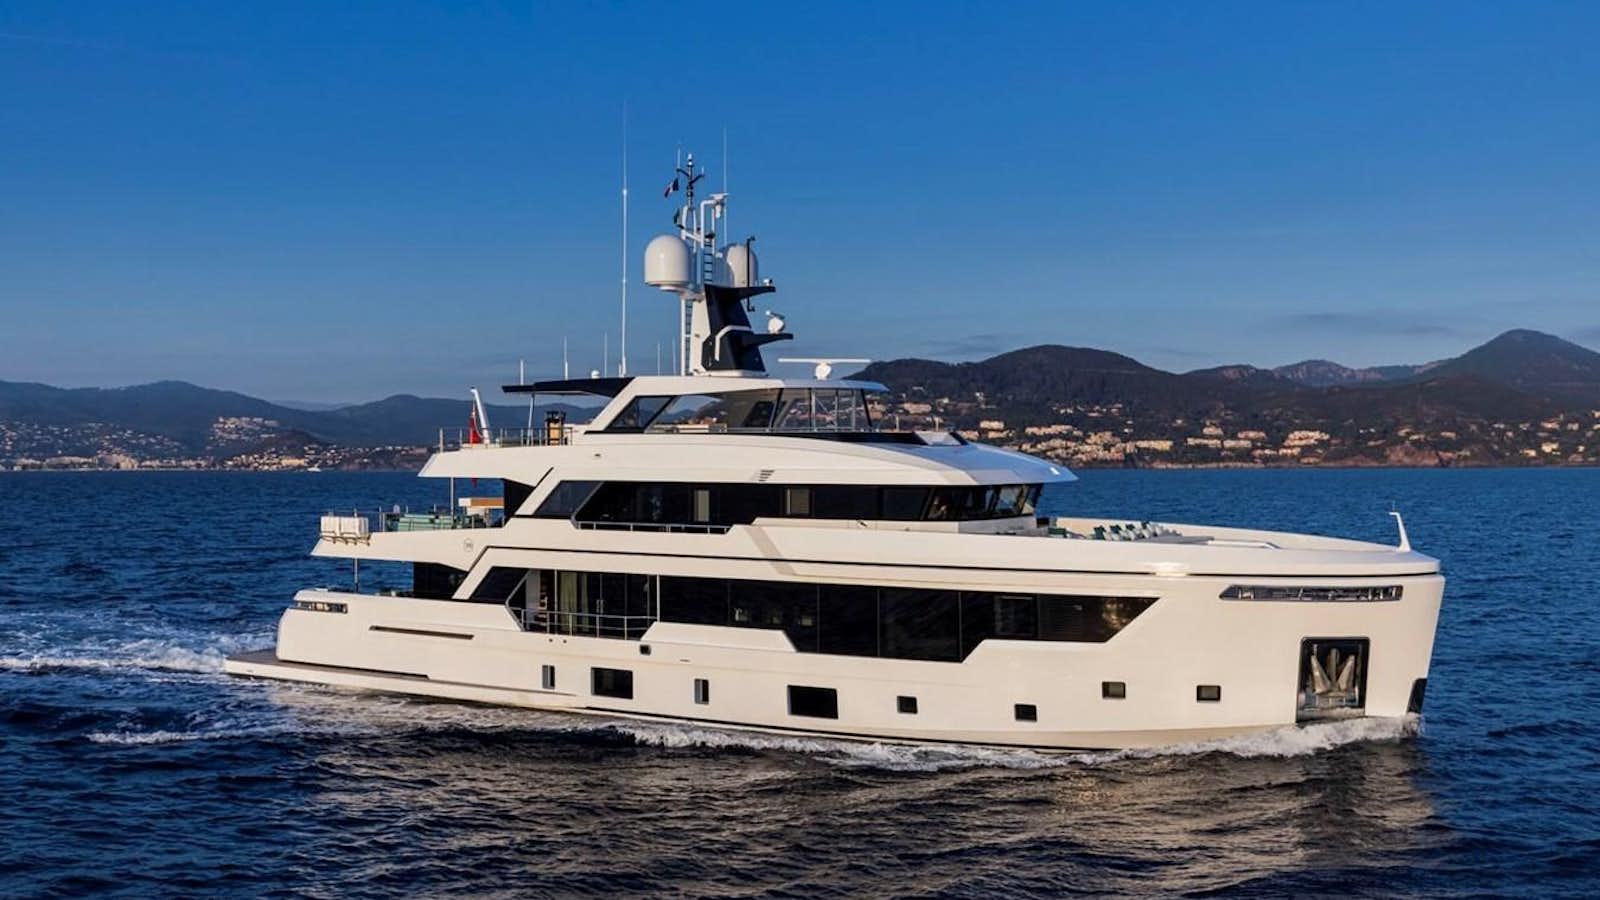 Watch Video for 38M EXPLORER HULL 3 Yacht for Sale